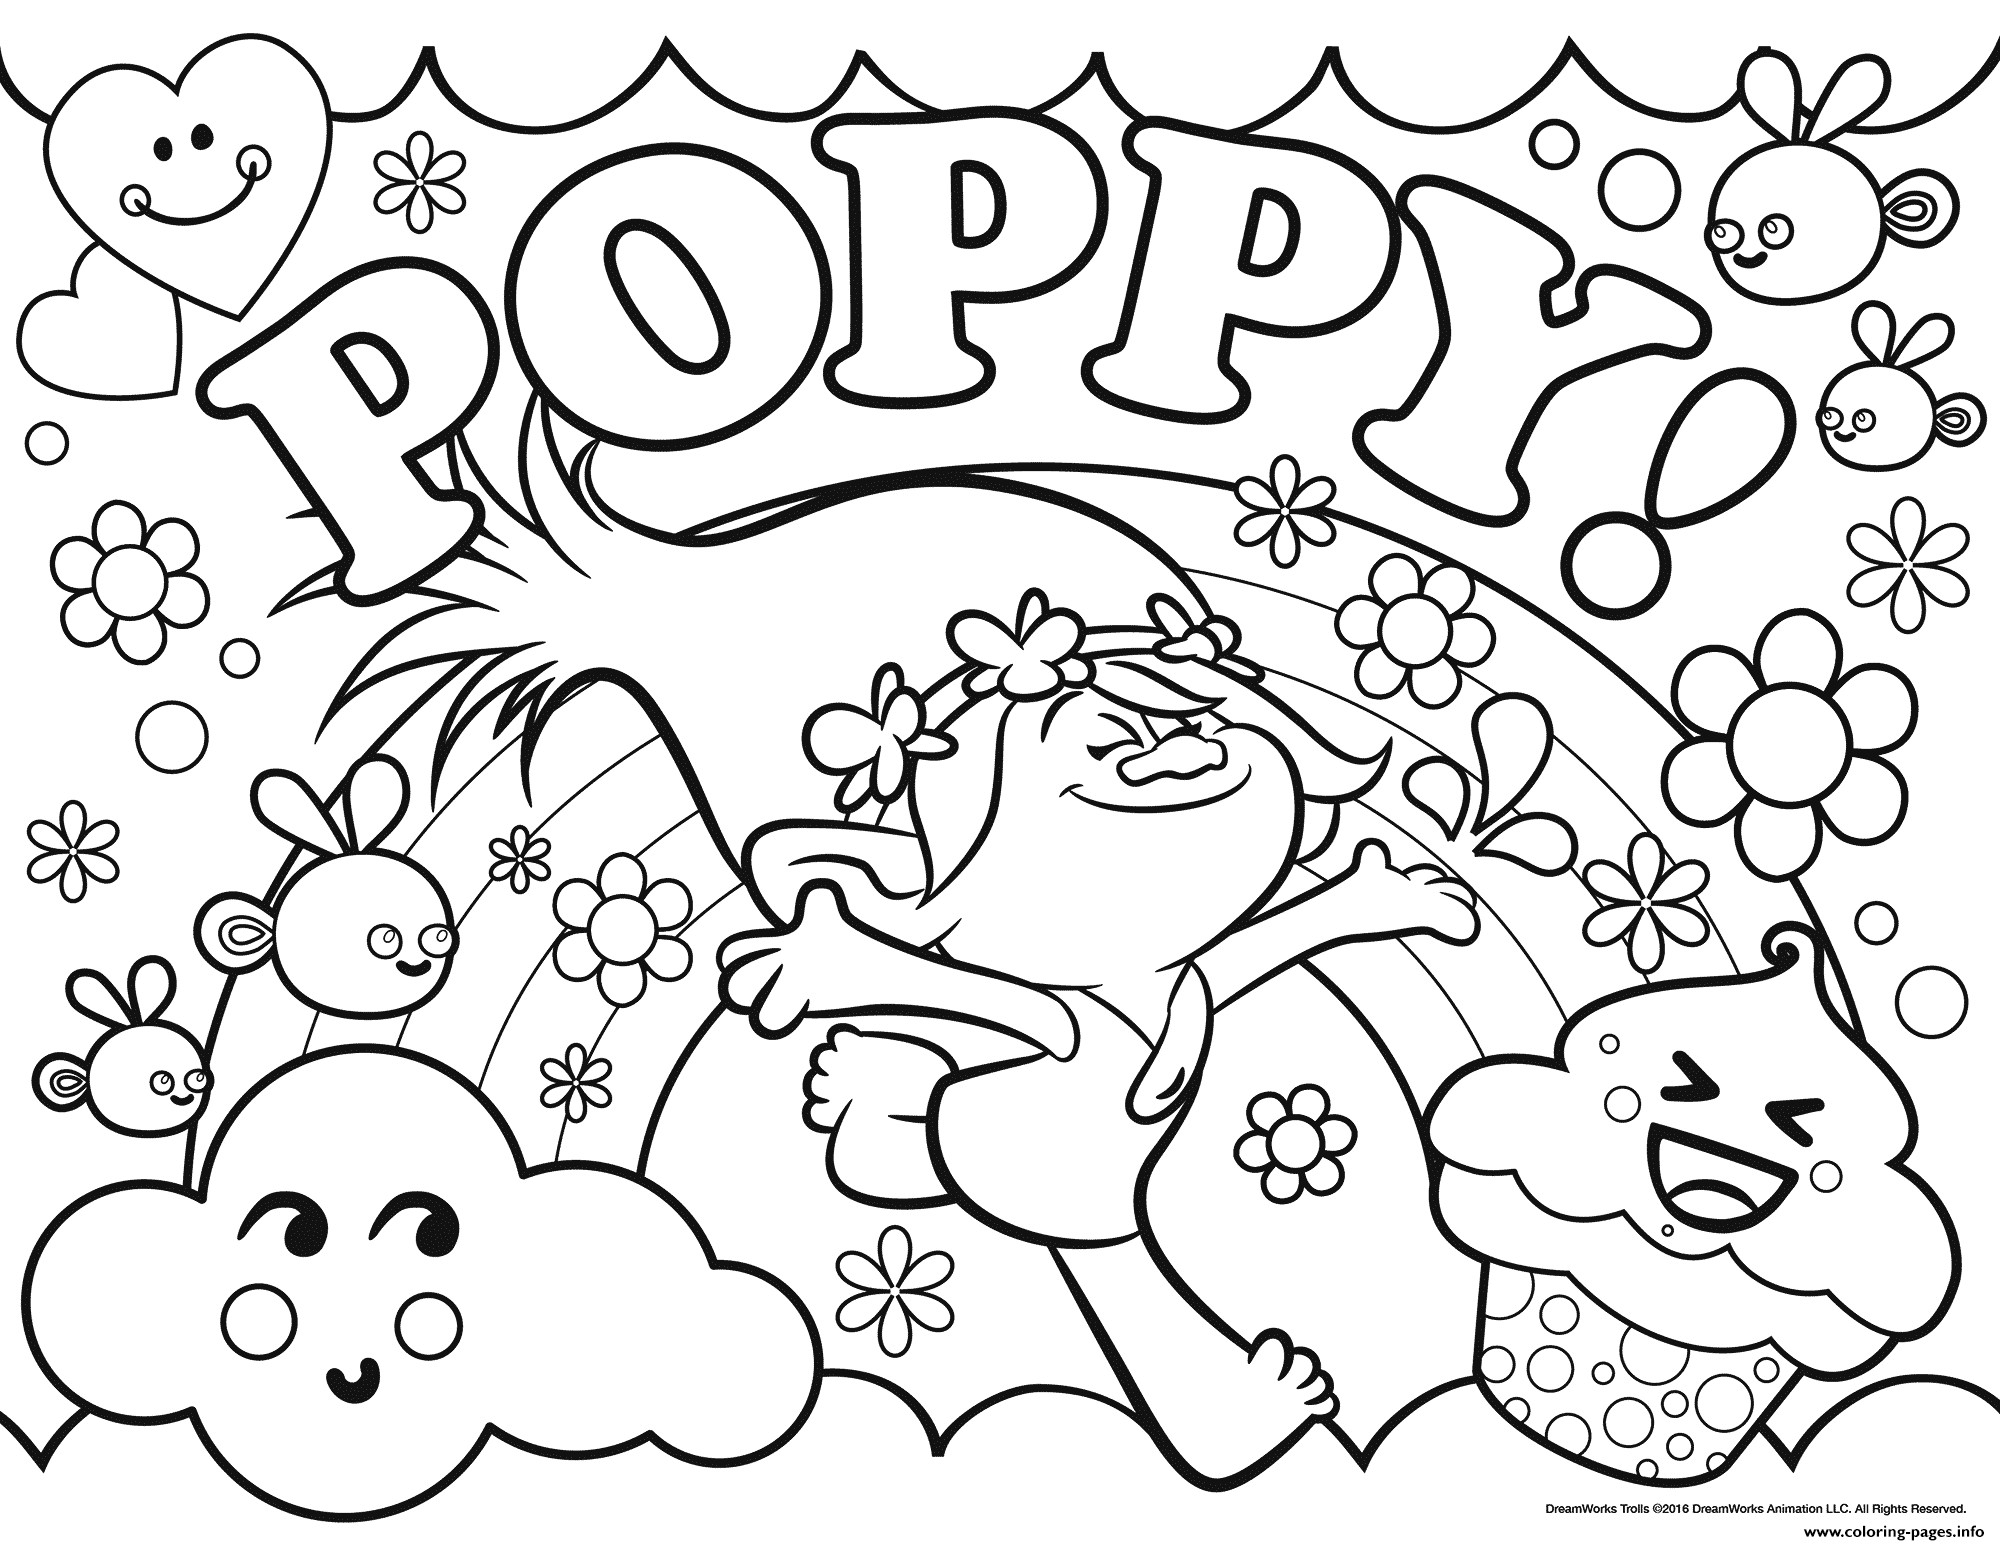 Trolls Spring Coloring Pages